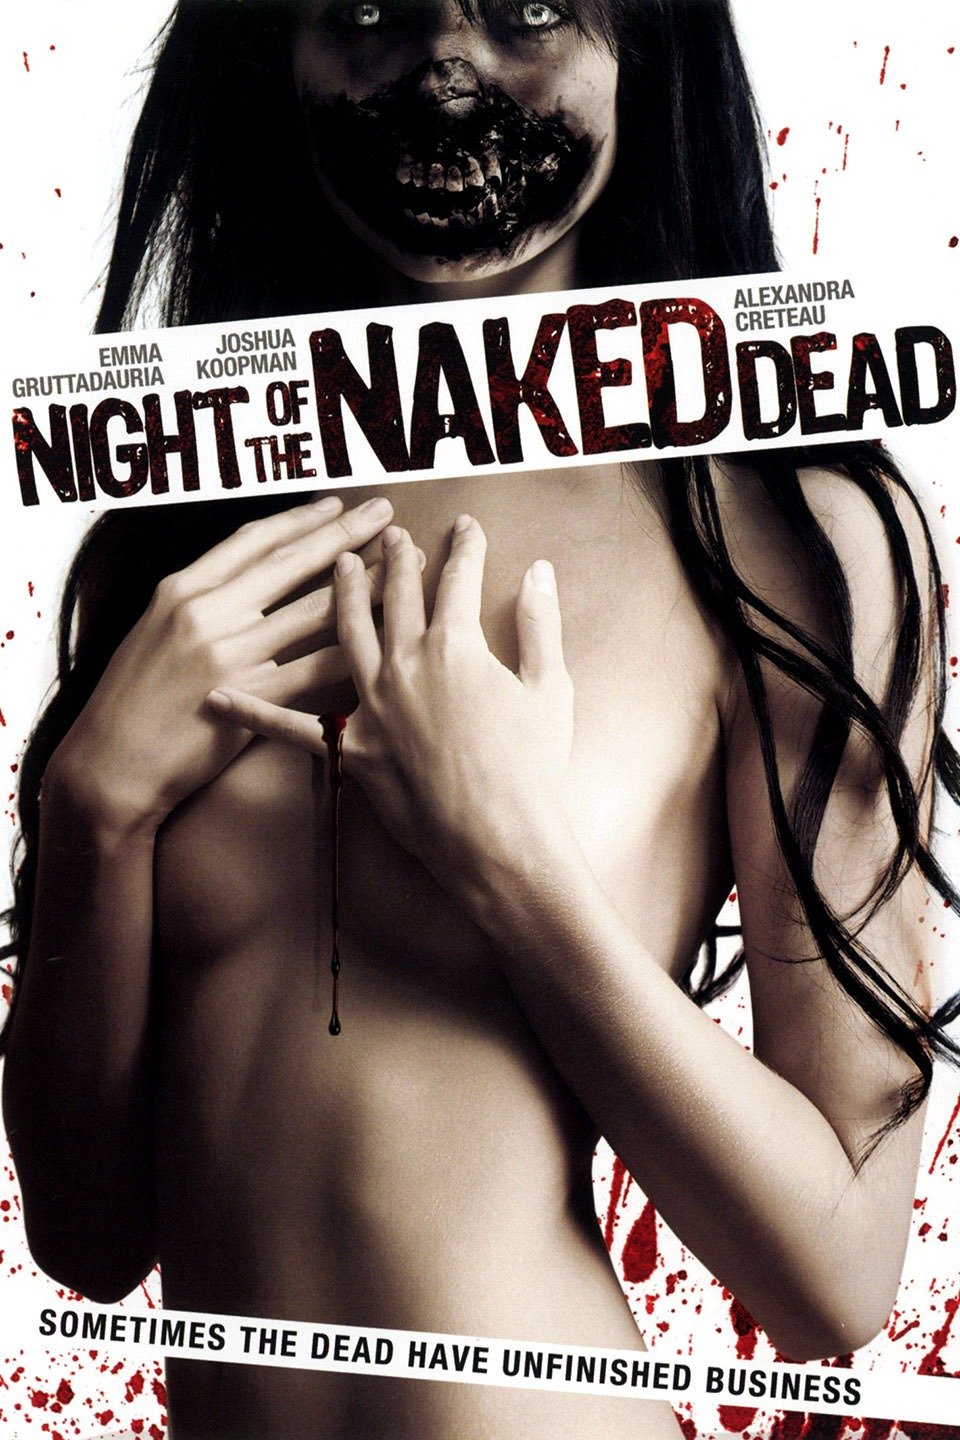 Night of the dead nude